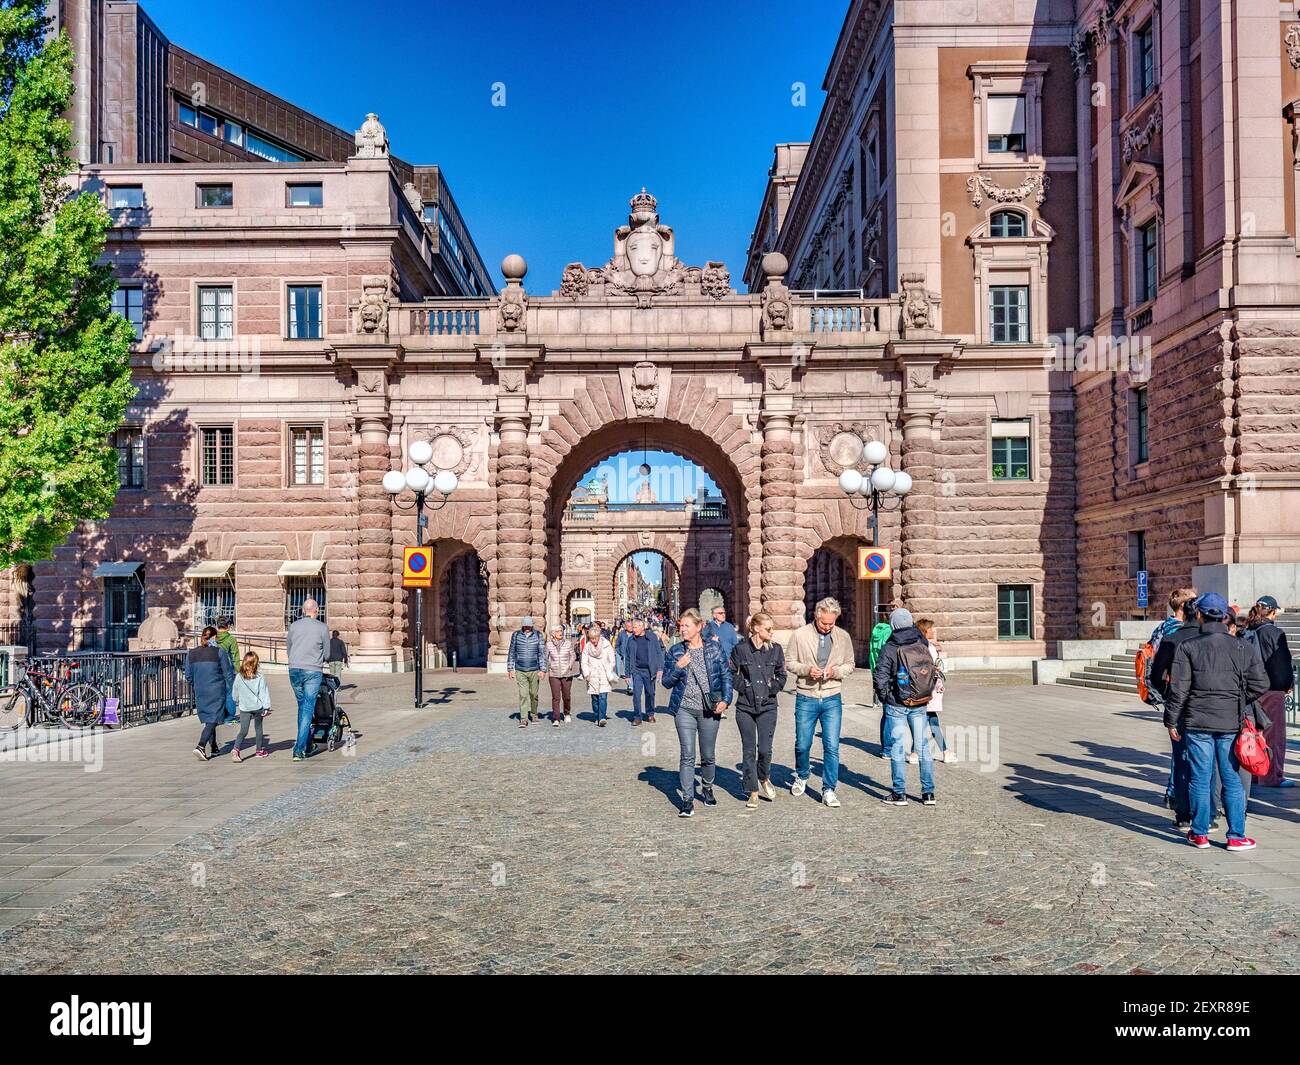 18 September 2018: Stockholm, Sweden - Shoppers coming through the arches of the Parliament building, the Sveriges Rikstag. Stock Photo